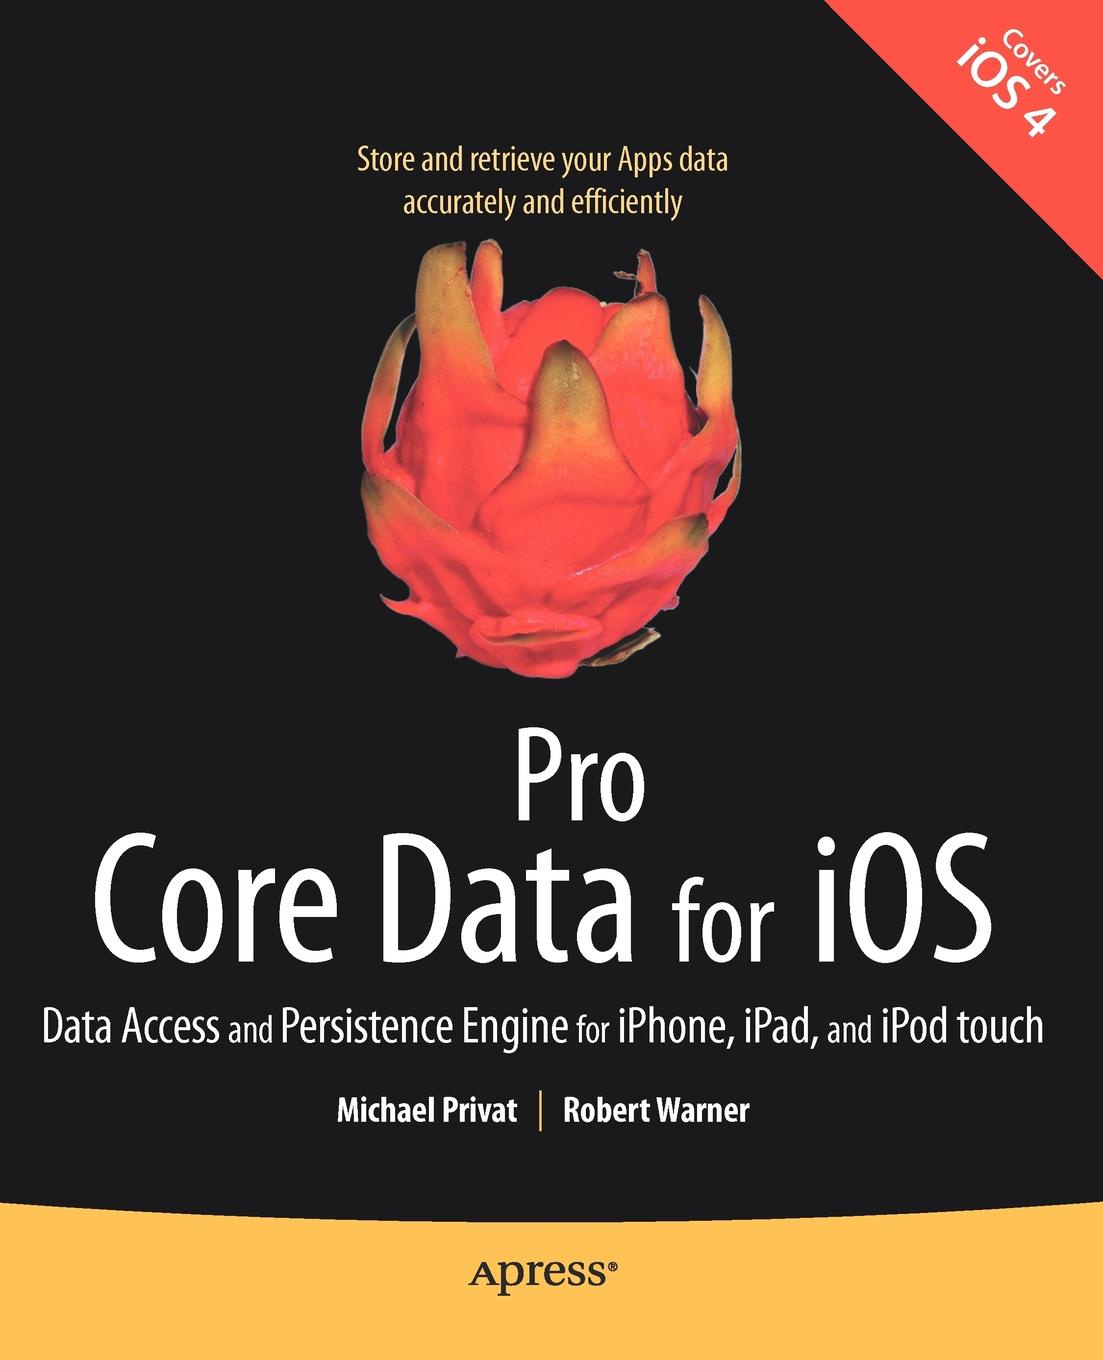 Pro Core Data for iOS. Data Access and Persistence Engine for iPhone, iPad, and iPod Touch